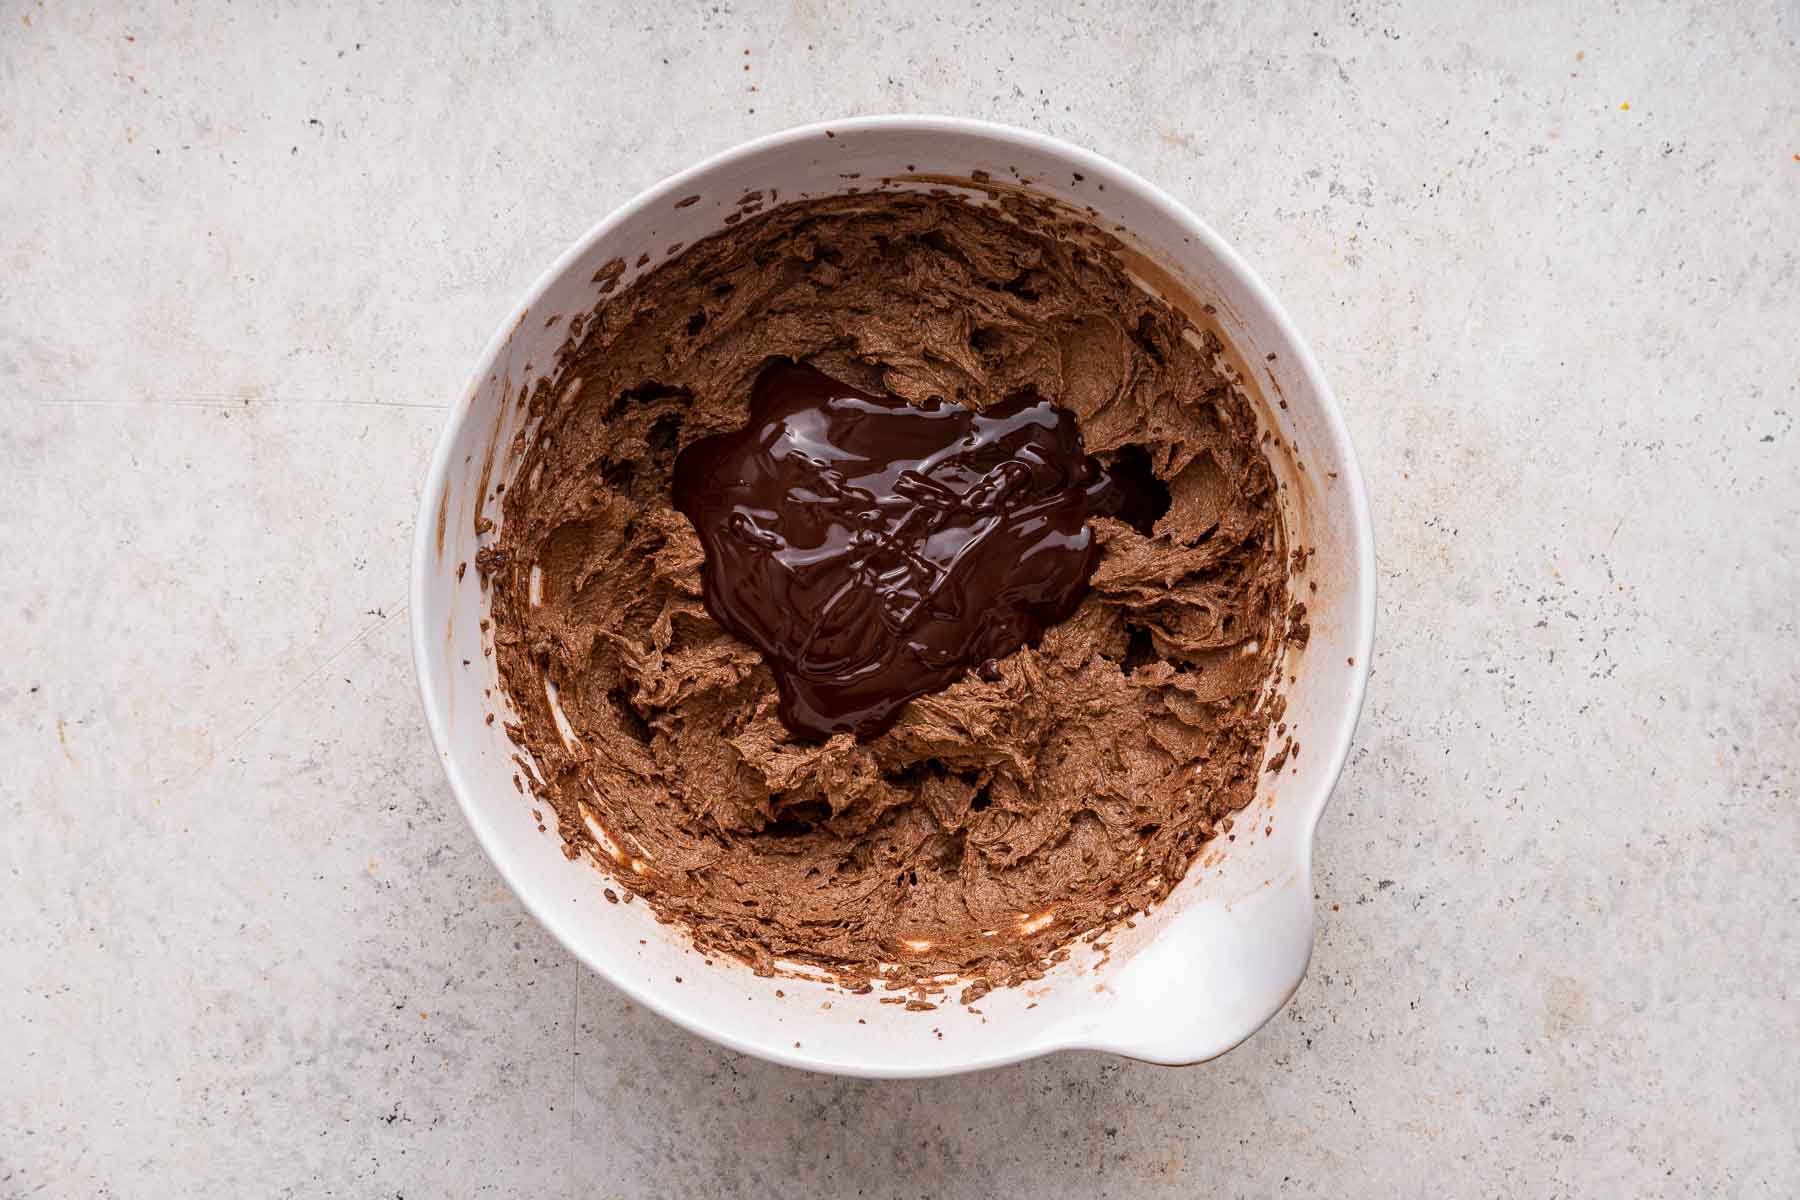 Chocolate frosting in white bowl with pile of melted chocolate poured on top.